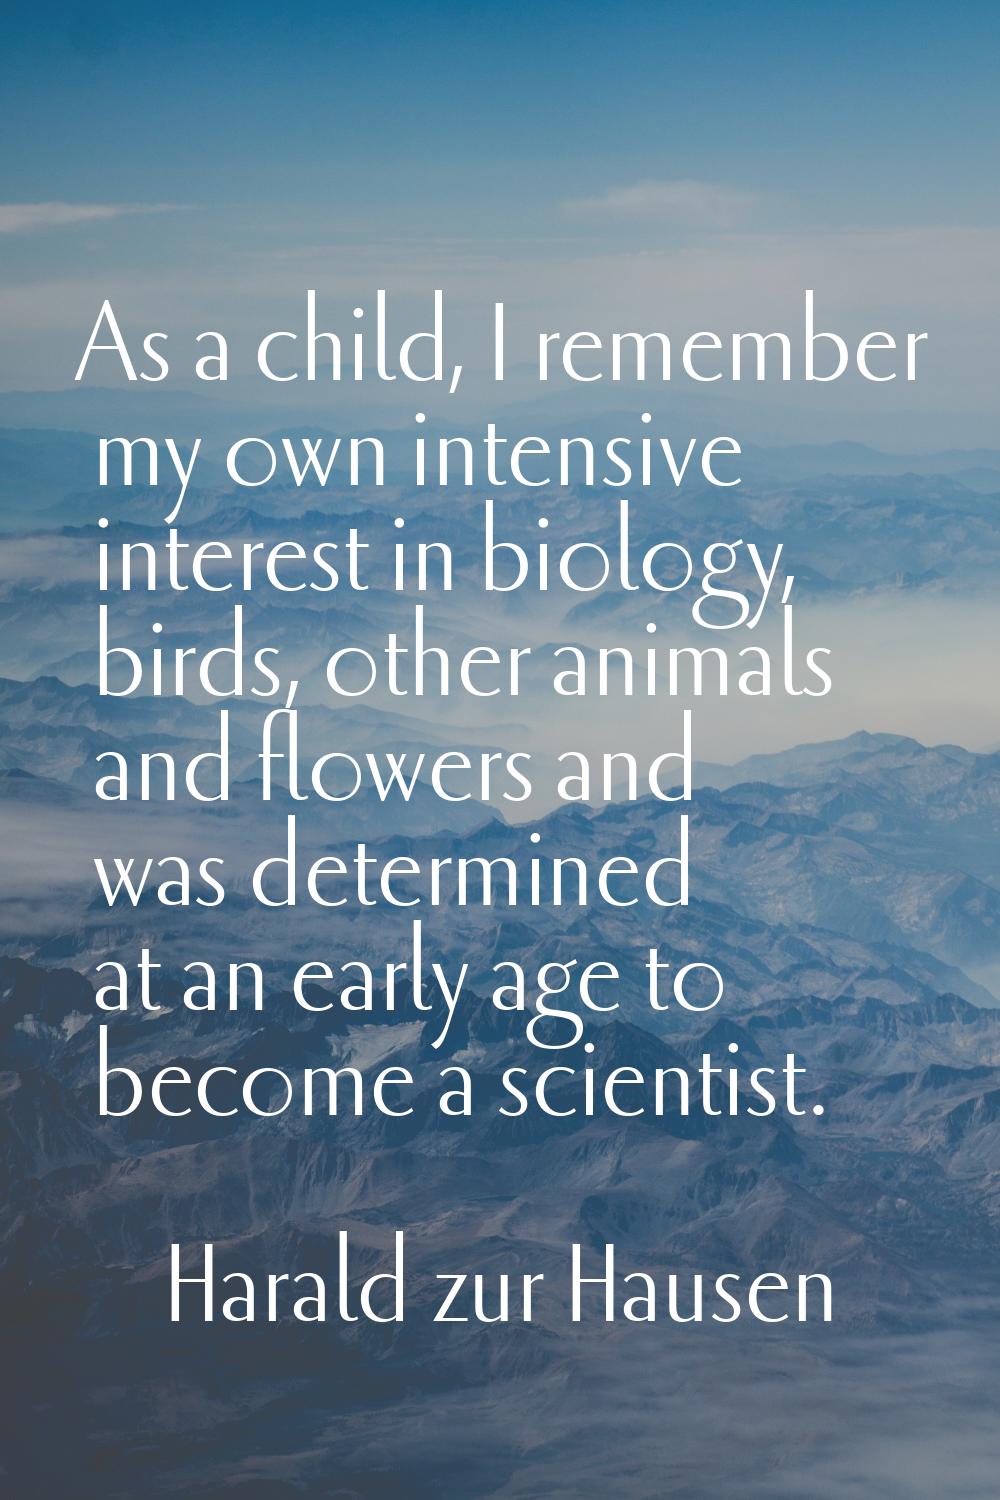 As a child, I remember my own intensive interest in biology, birds, other animals and flowers and w